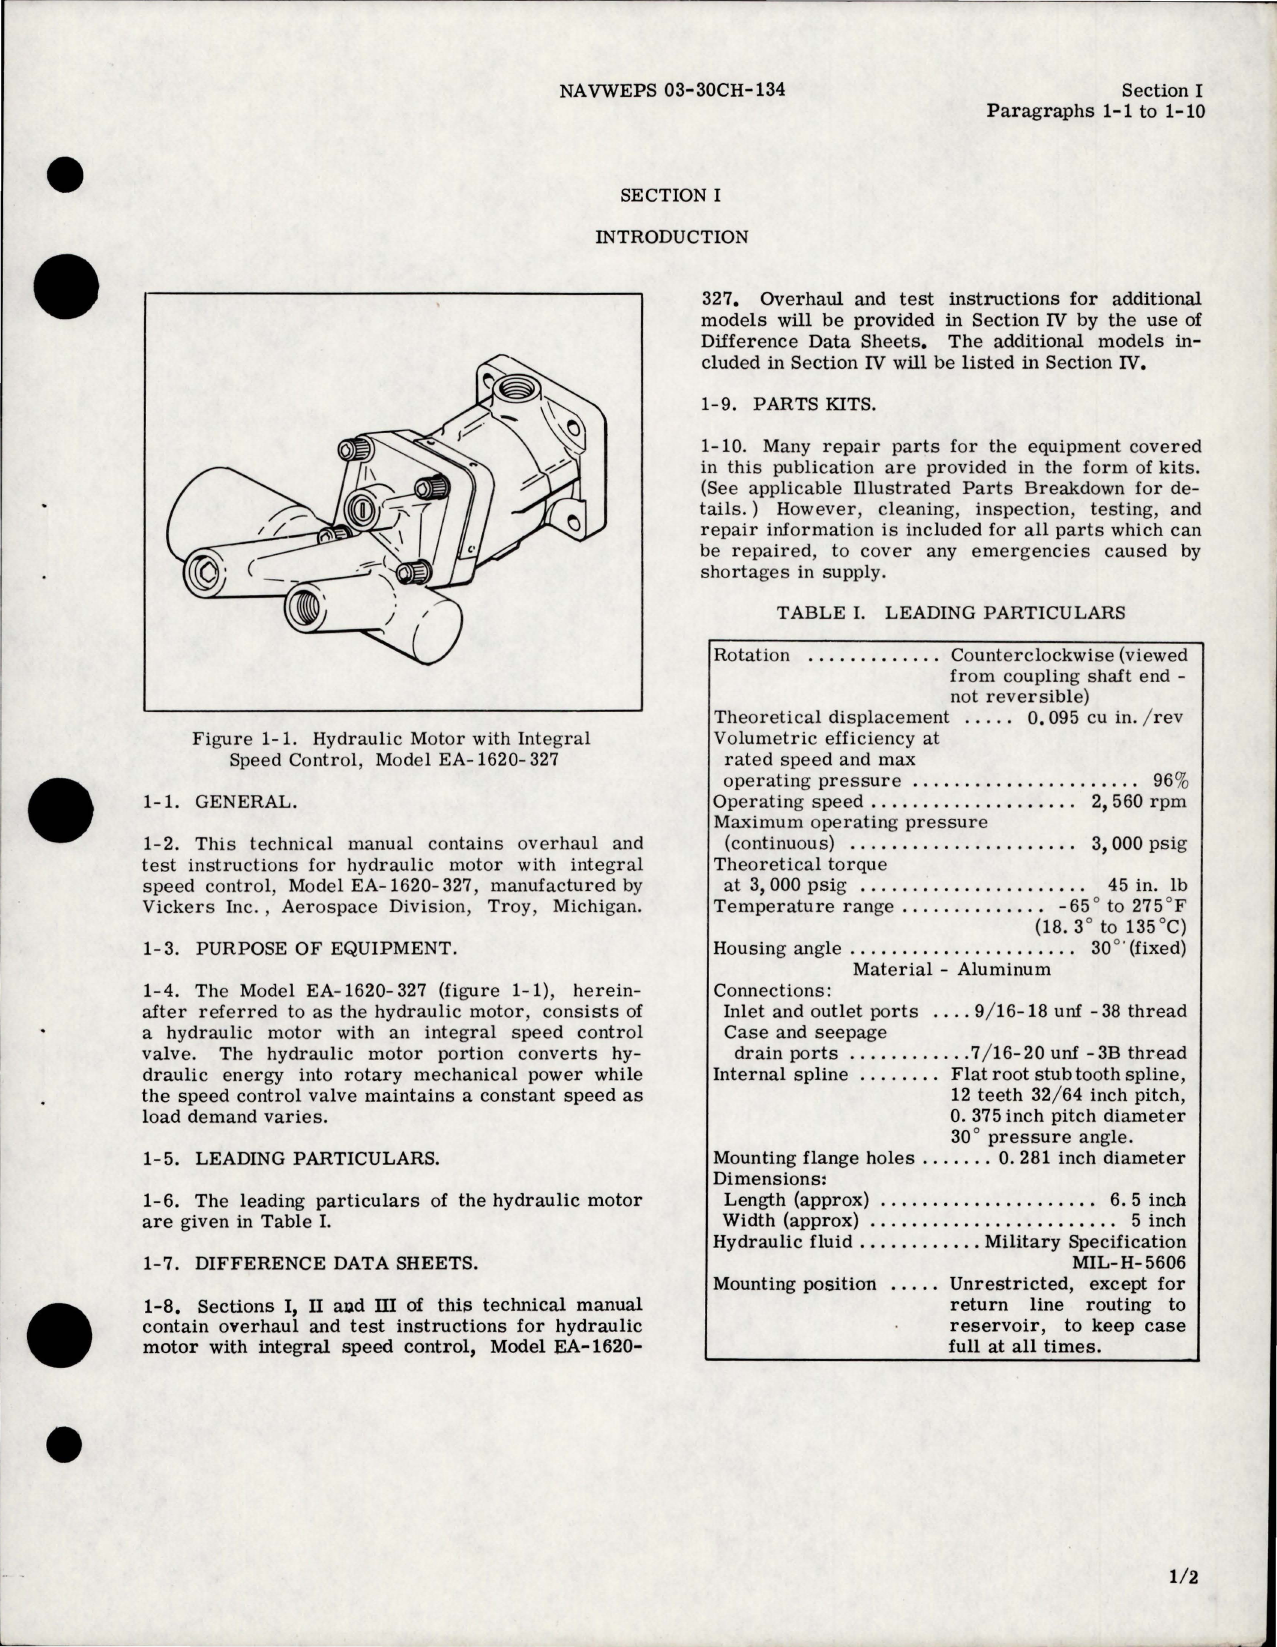 Sample page 5 from AirCorps Library document: Overhaul Instructions for Hydraulic Motor with Integral Speed Control - Model EA-1620-327 